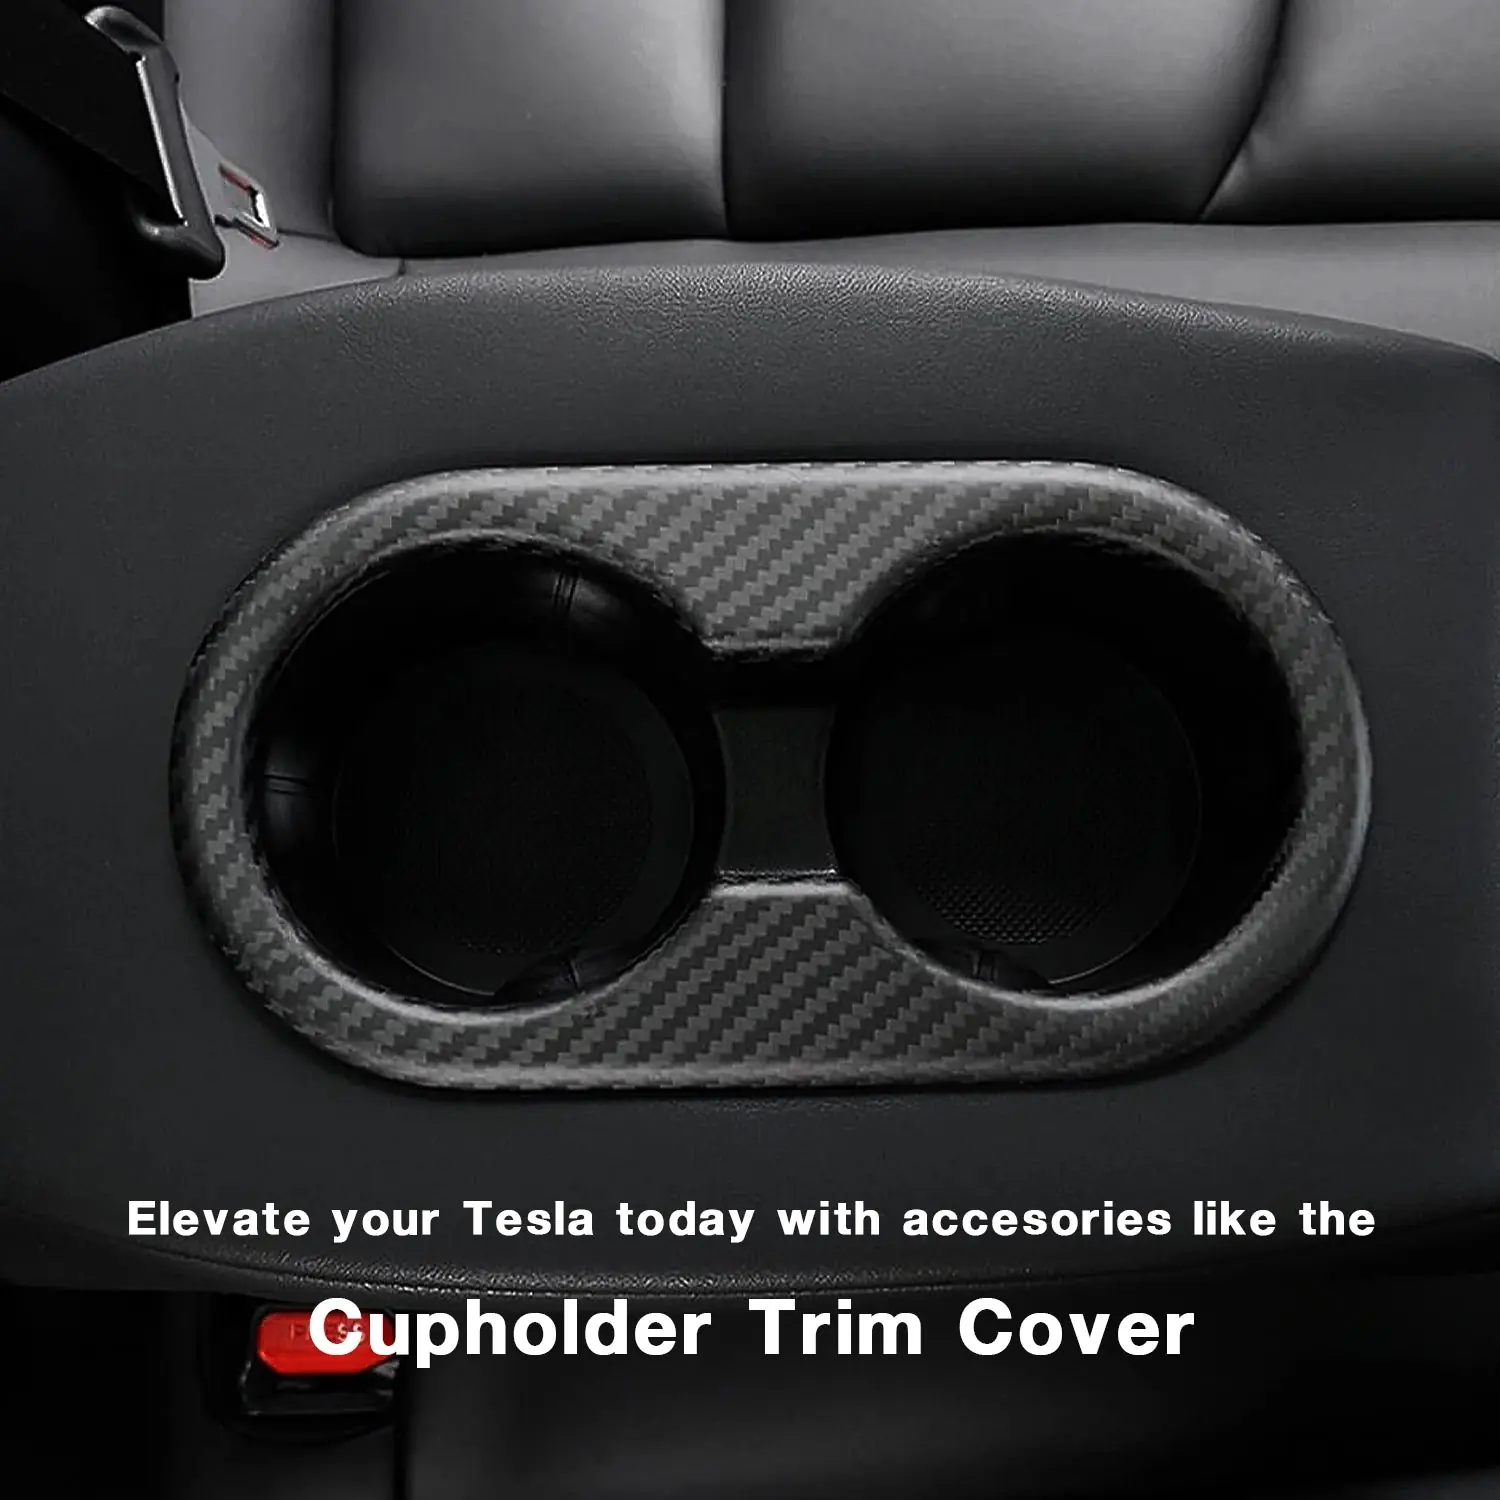 Adreama Tesla Model 3 Rear Seat Cupholder Trim Cover Made With Real Premium Dry Carbon Fiber (Ships Within 5-7 Days)